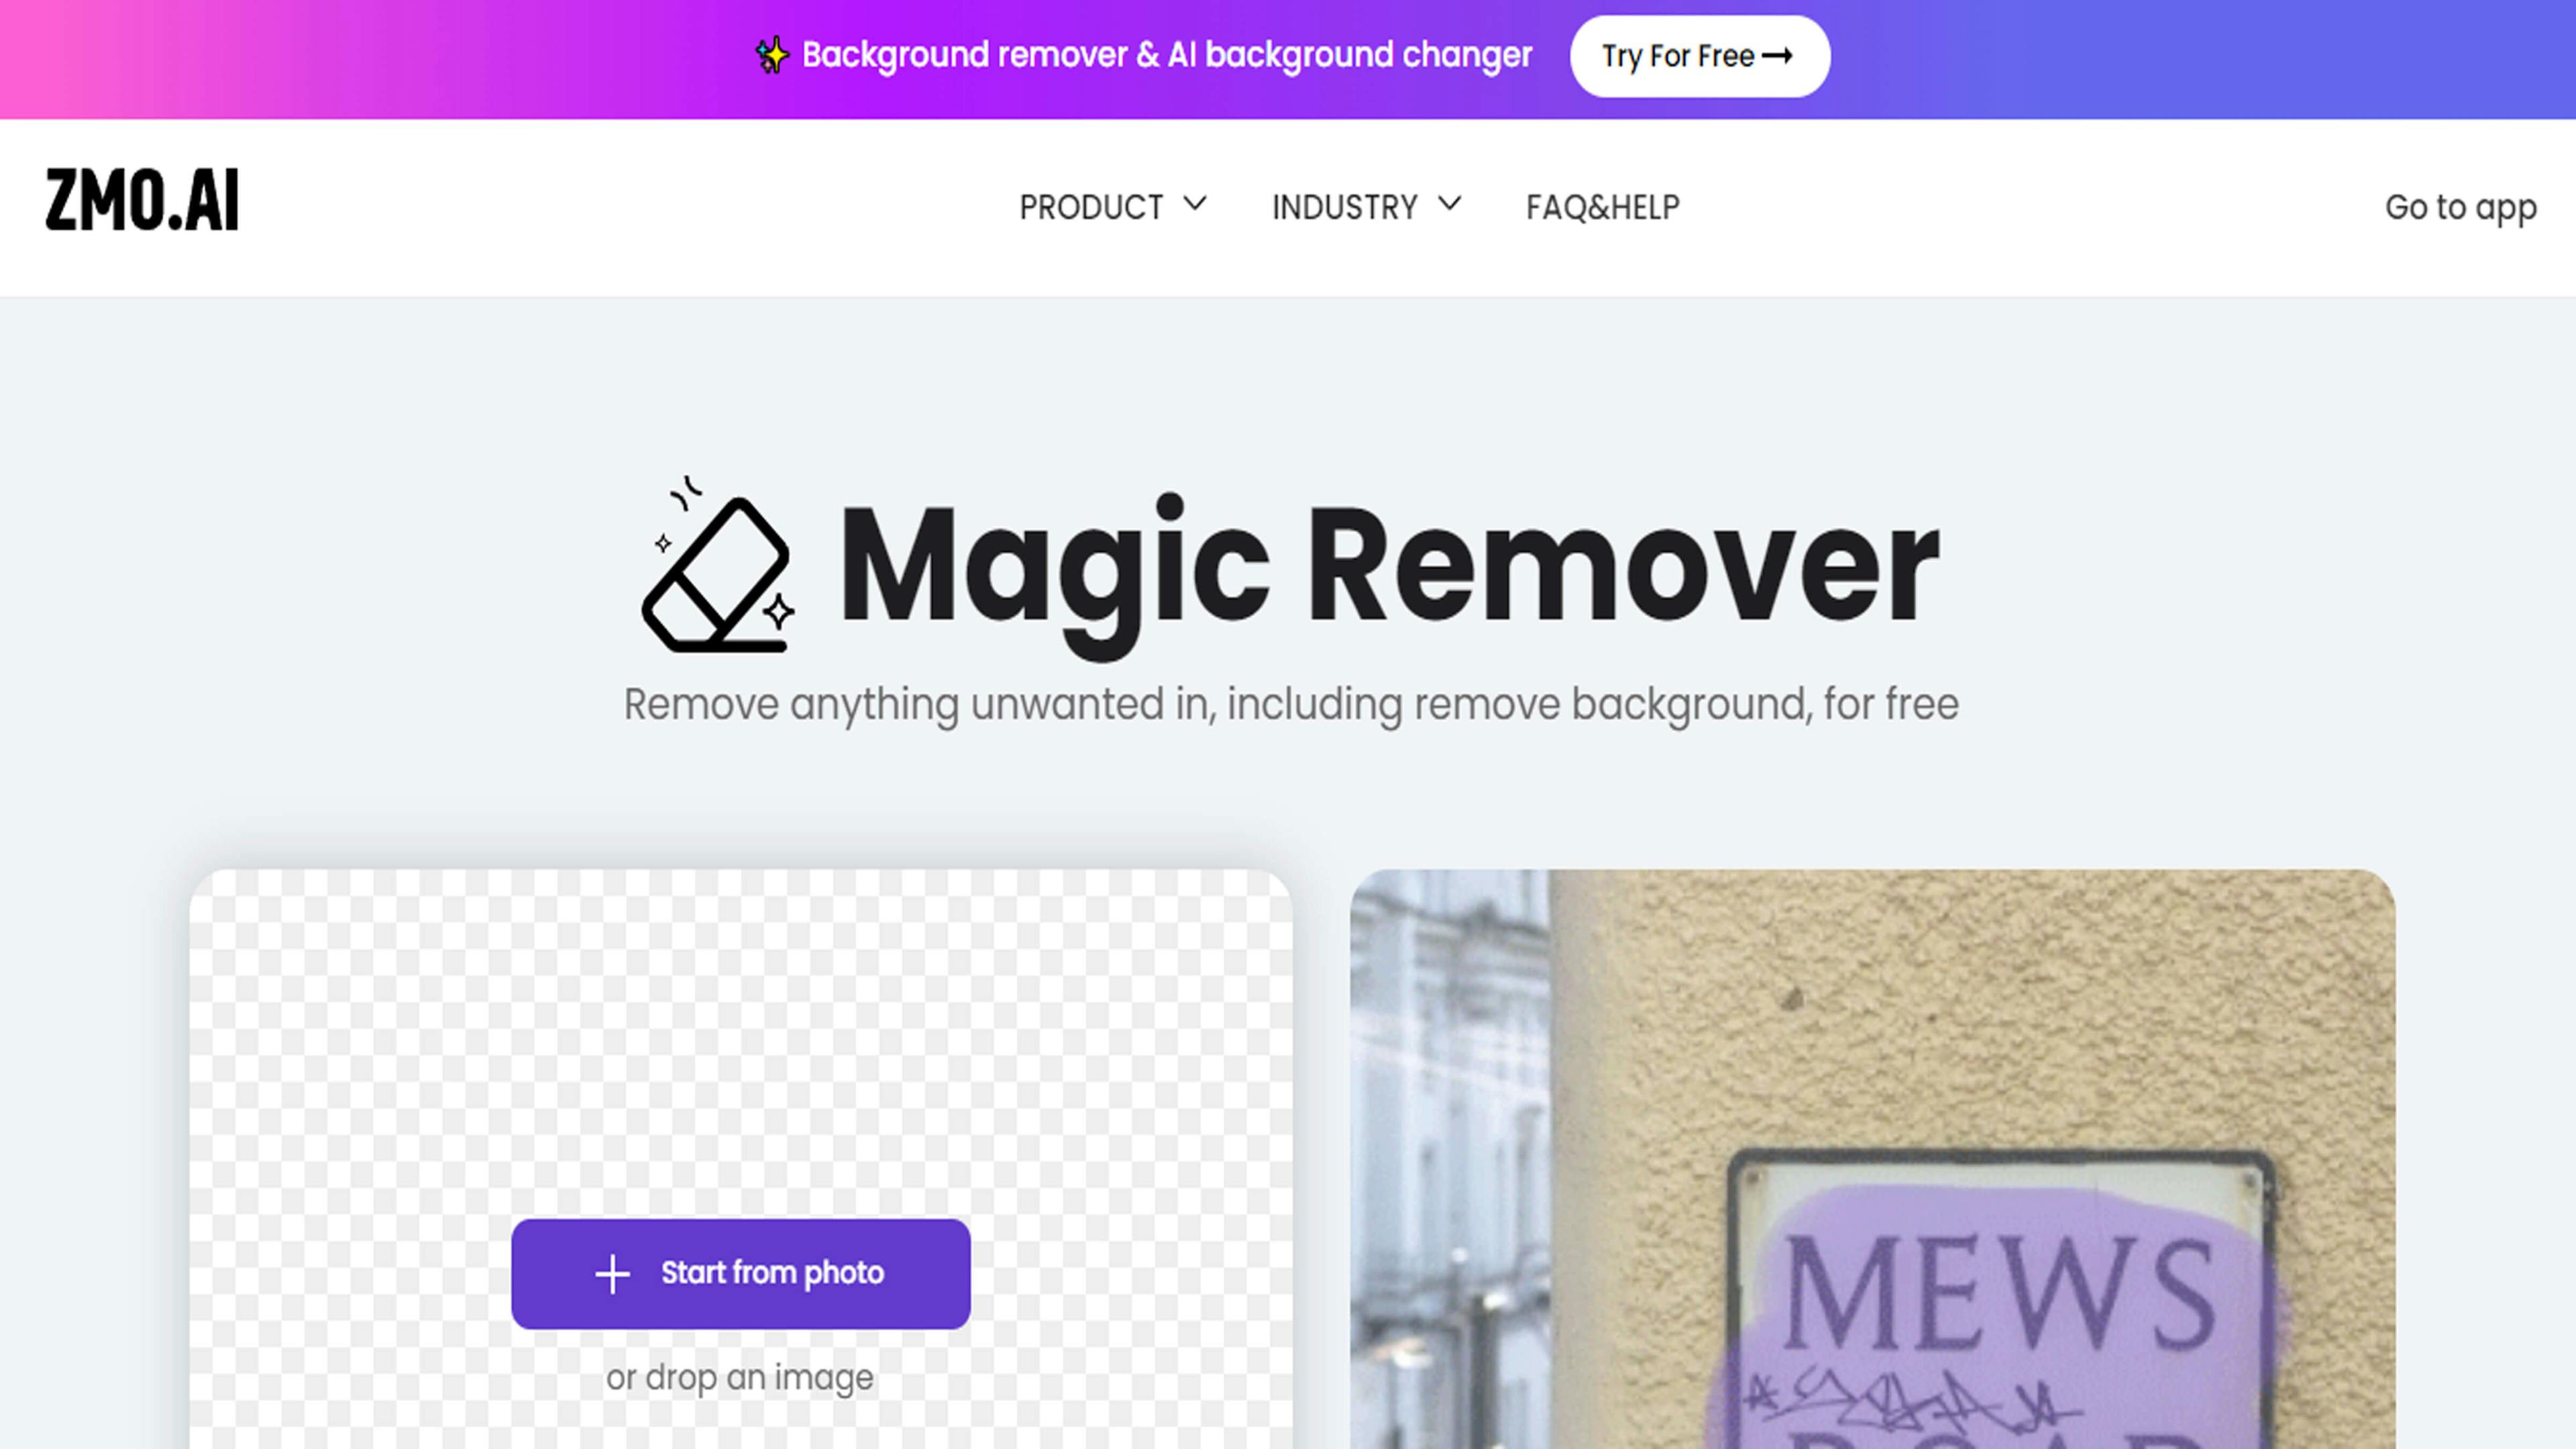 Remover by ZMO